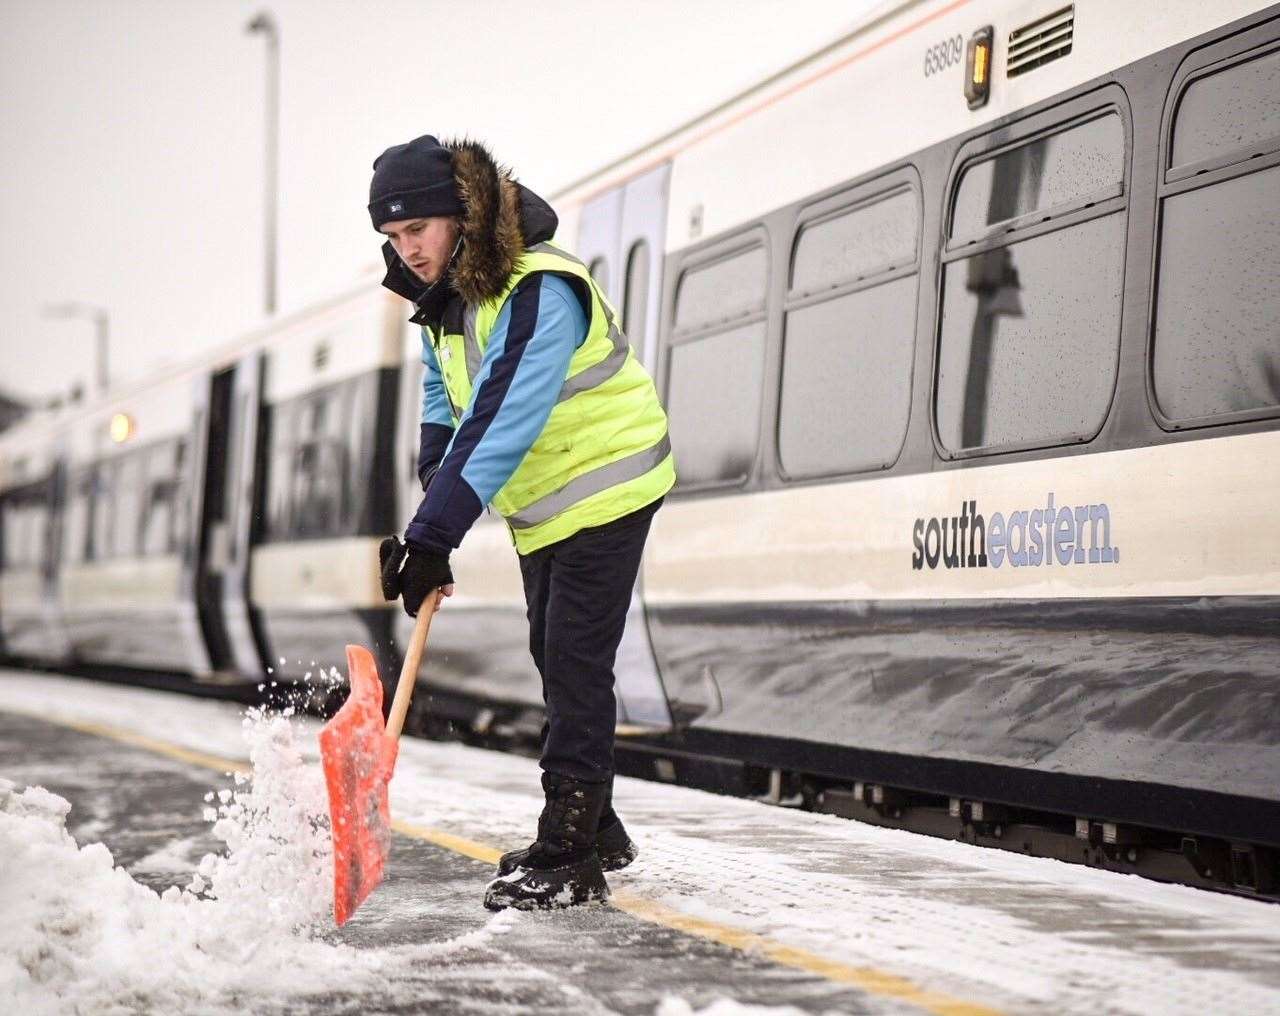 Train services and flights were cancelled and roads closed when the storm hit